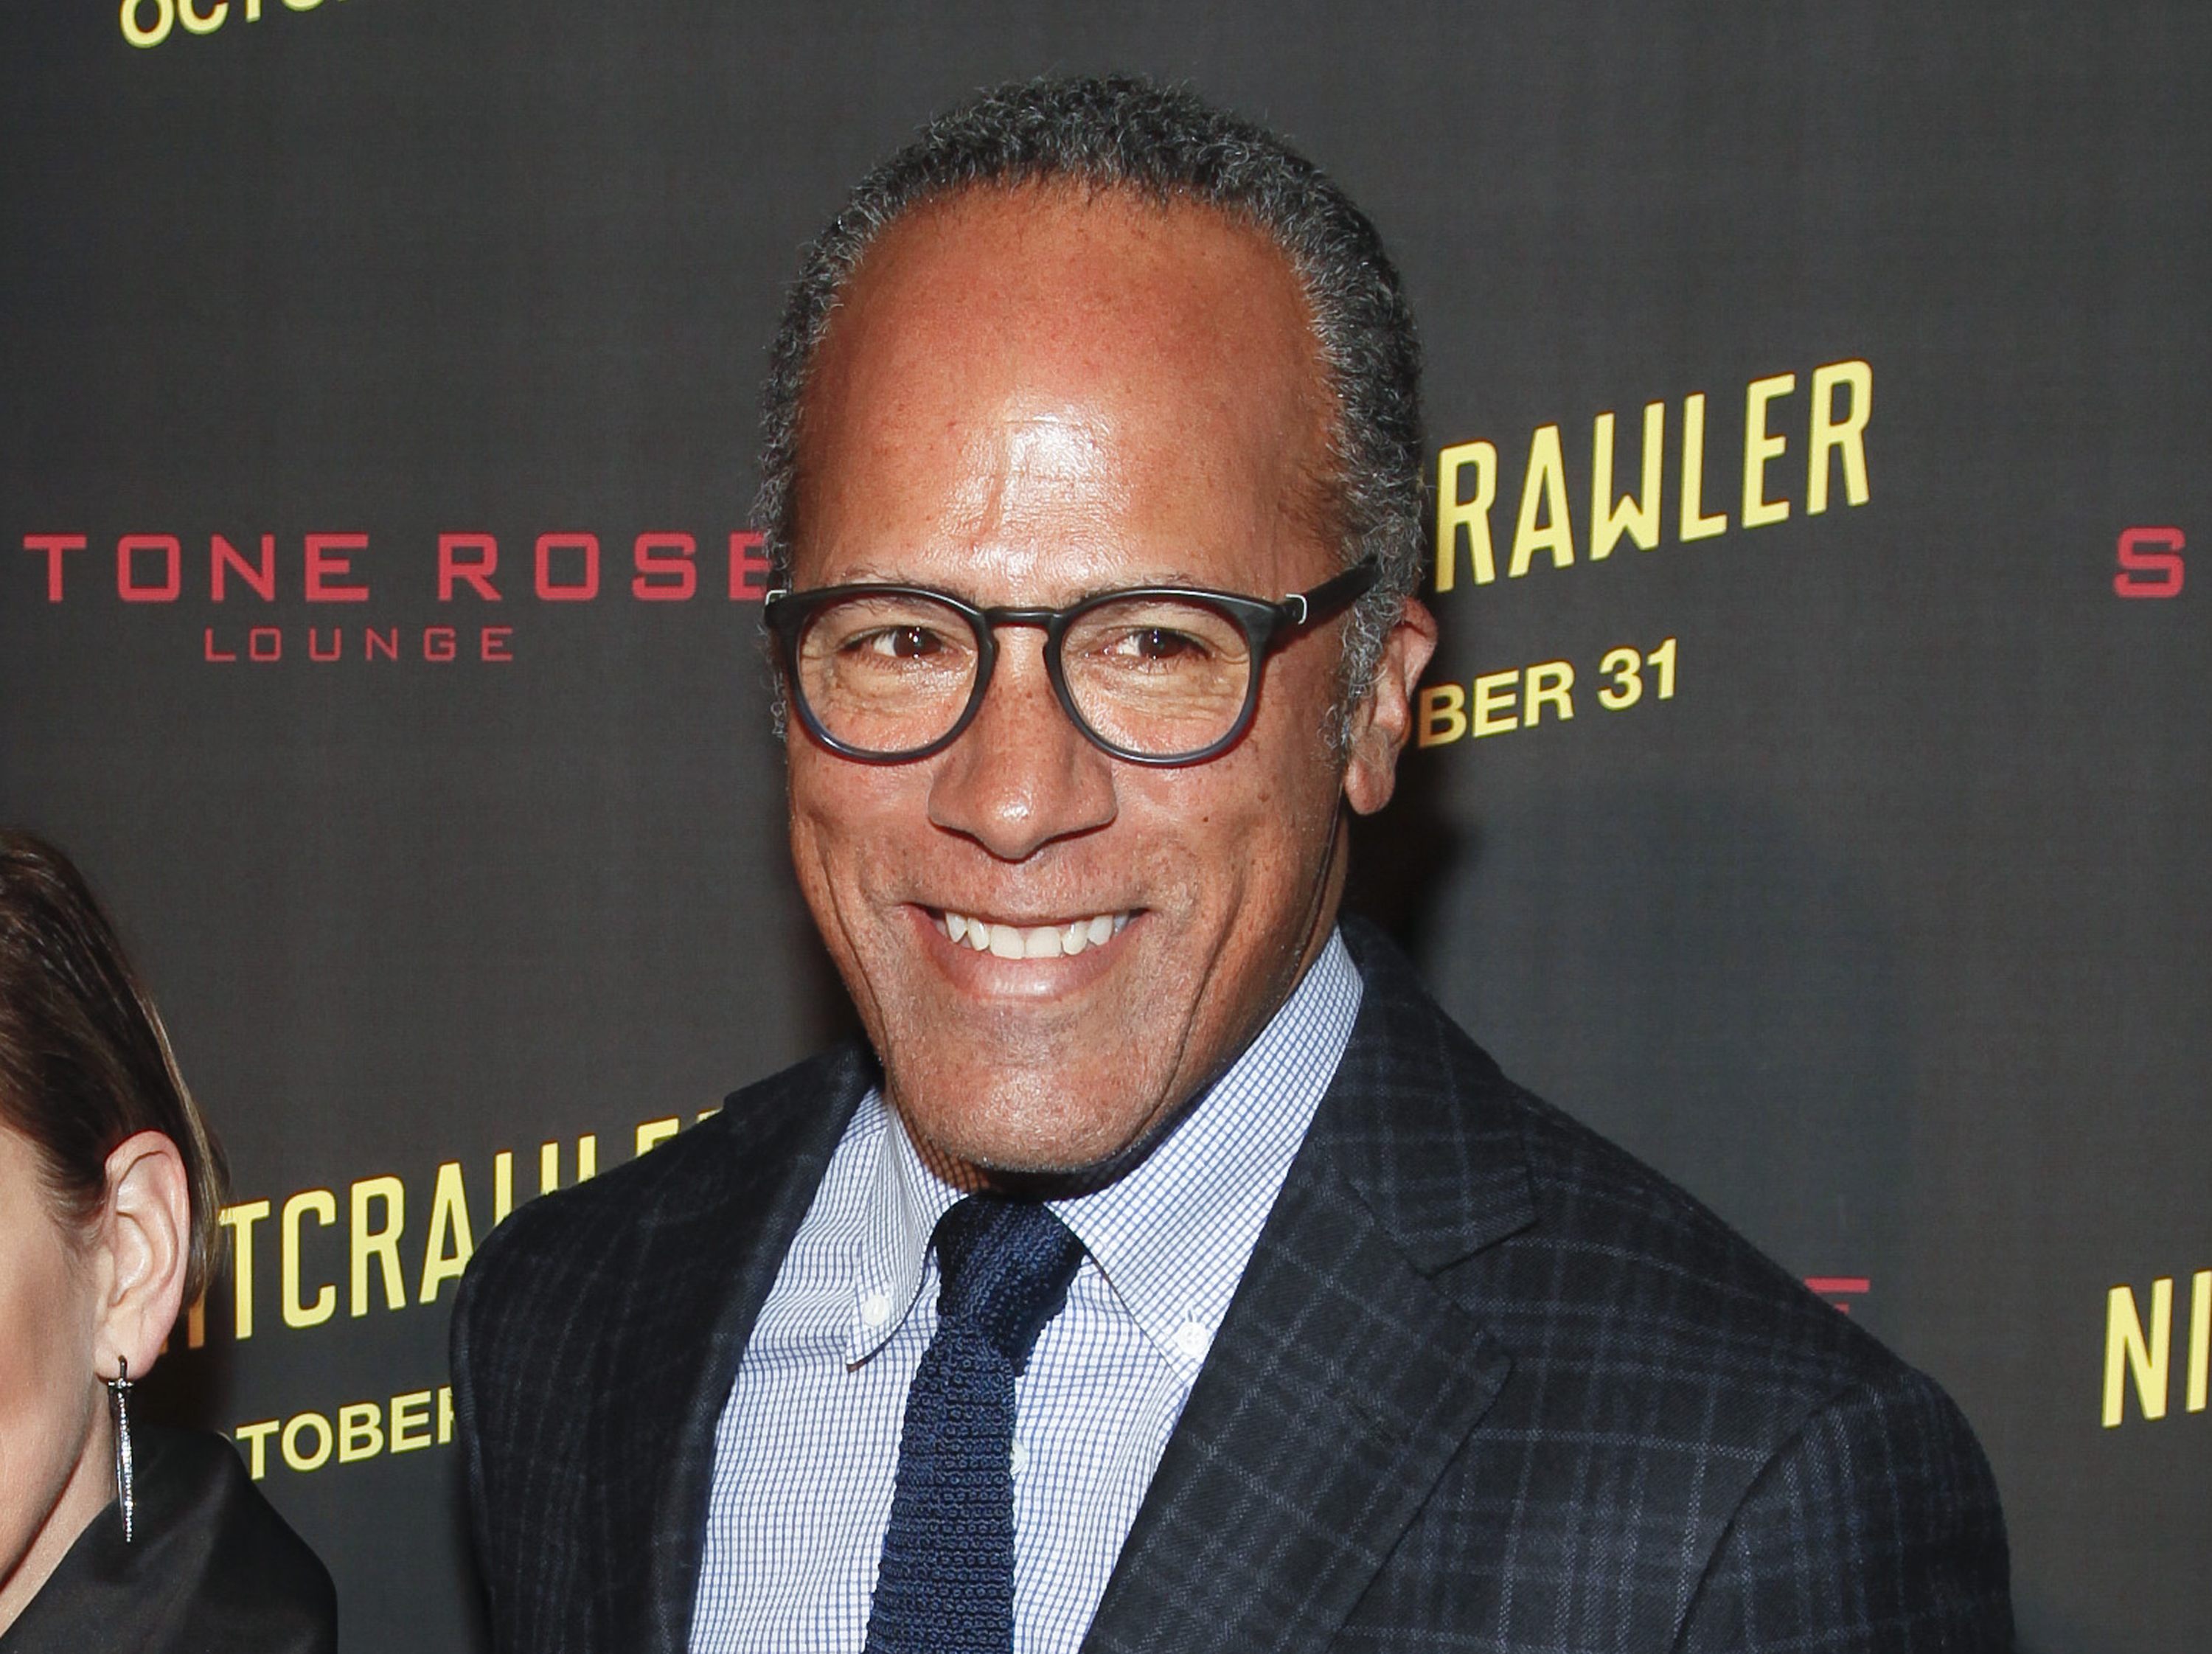 NBC s new anchor Lester Holt rose steadily to top Breitbart